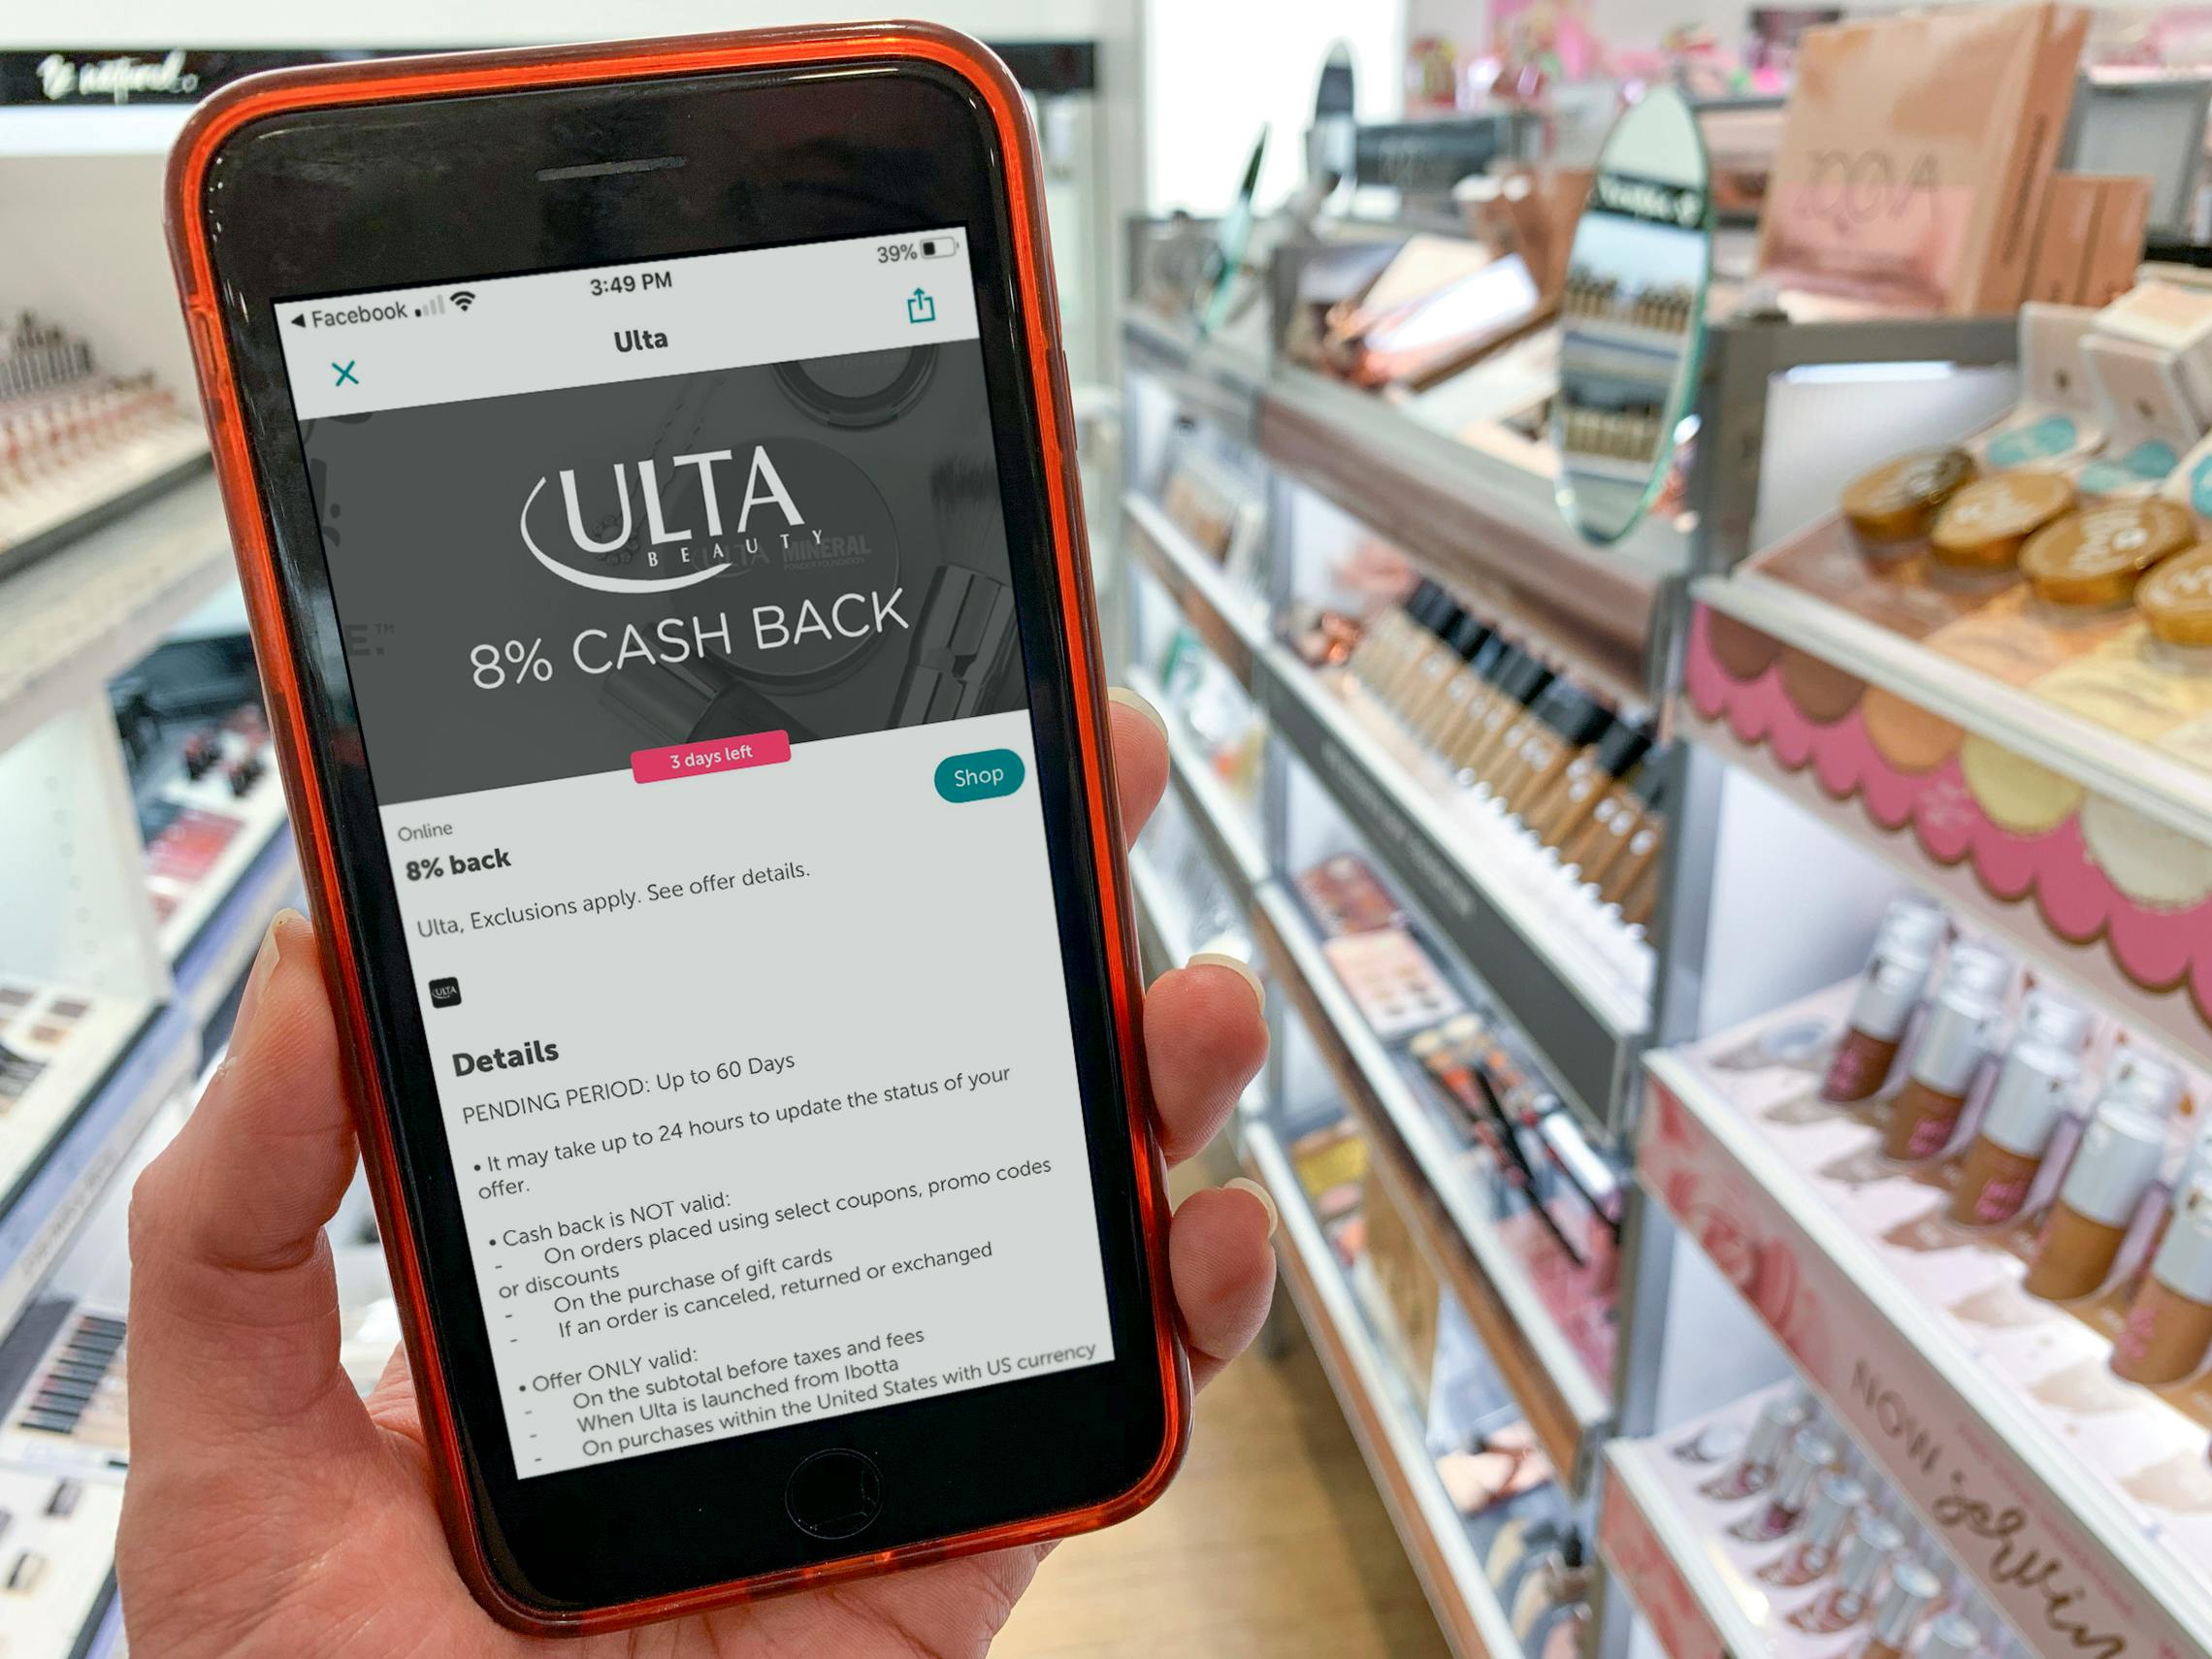 Hand holds smart phone with screen showing Ibotta app and 8% cash back for ULTA